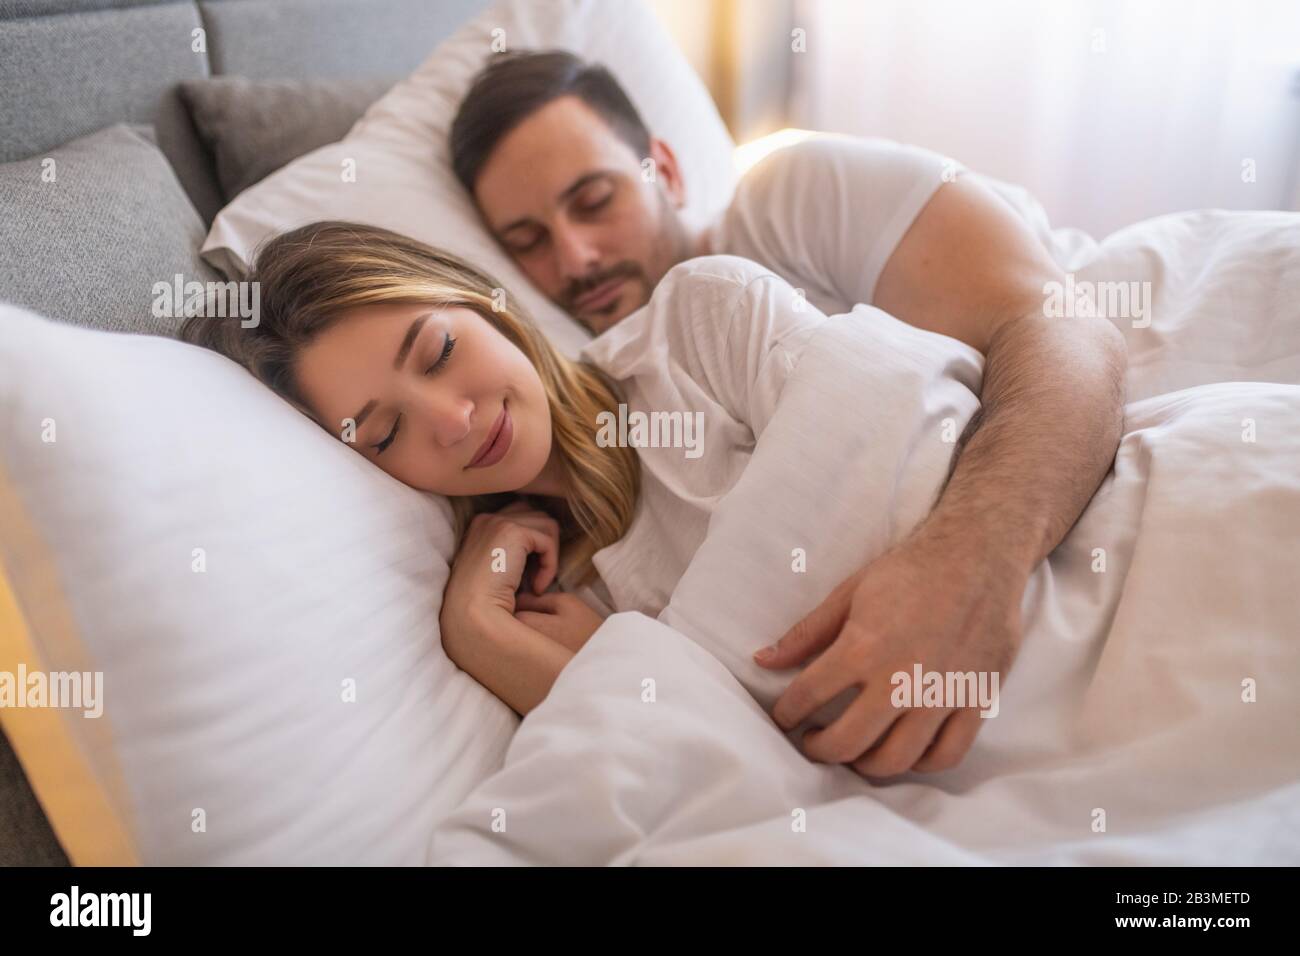 happy-couple-sleeping-in-bed-at-homeyoung-cute-couple-sleeping-together-in-bedromantic-moments-2B3METD.jpg